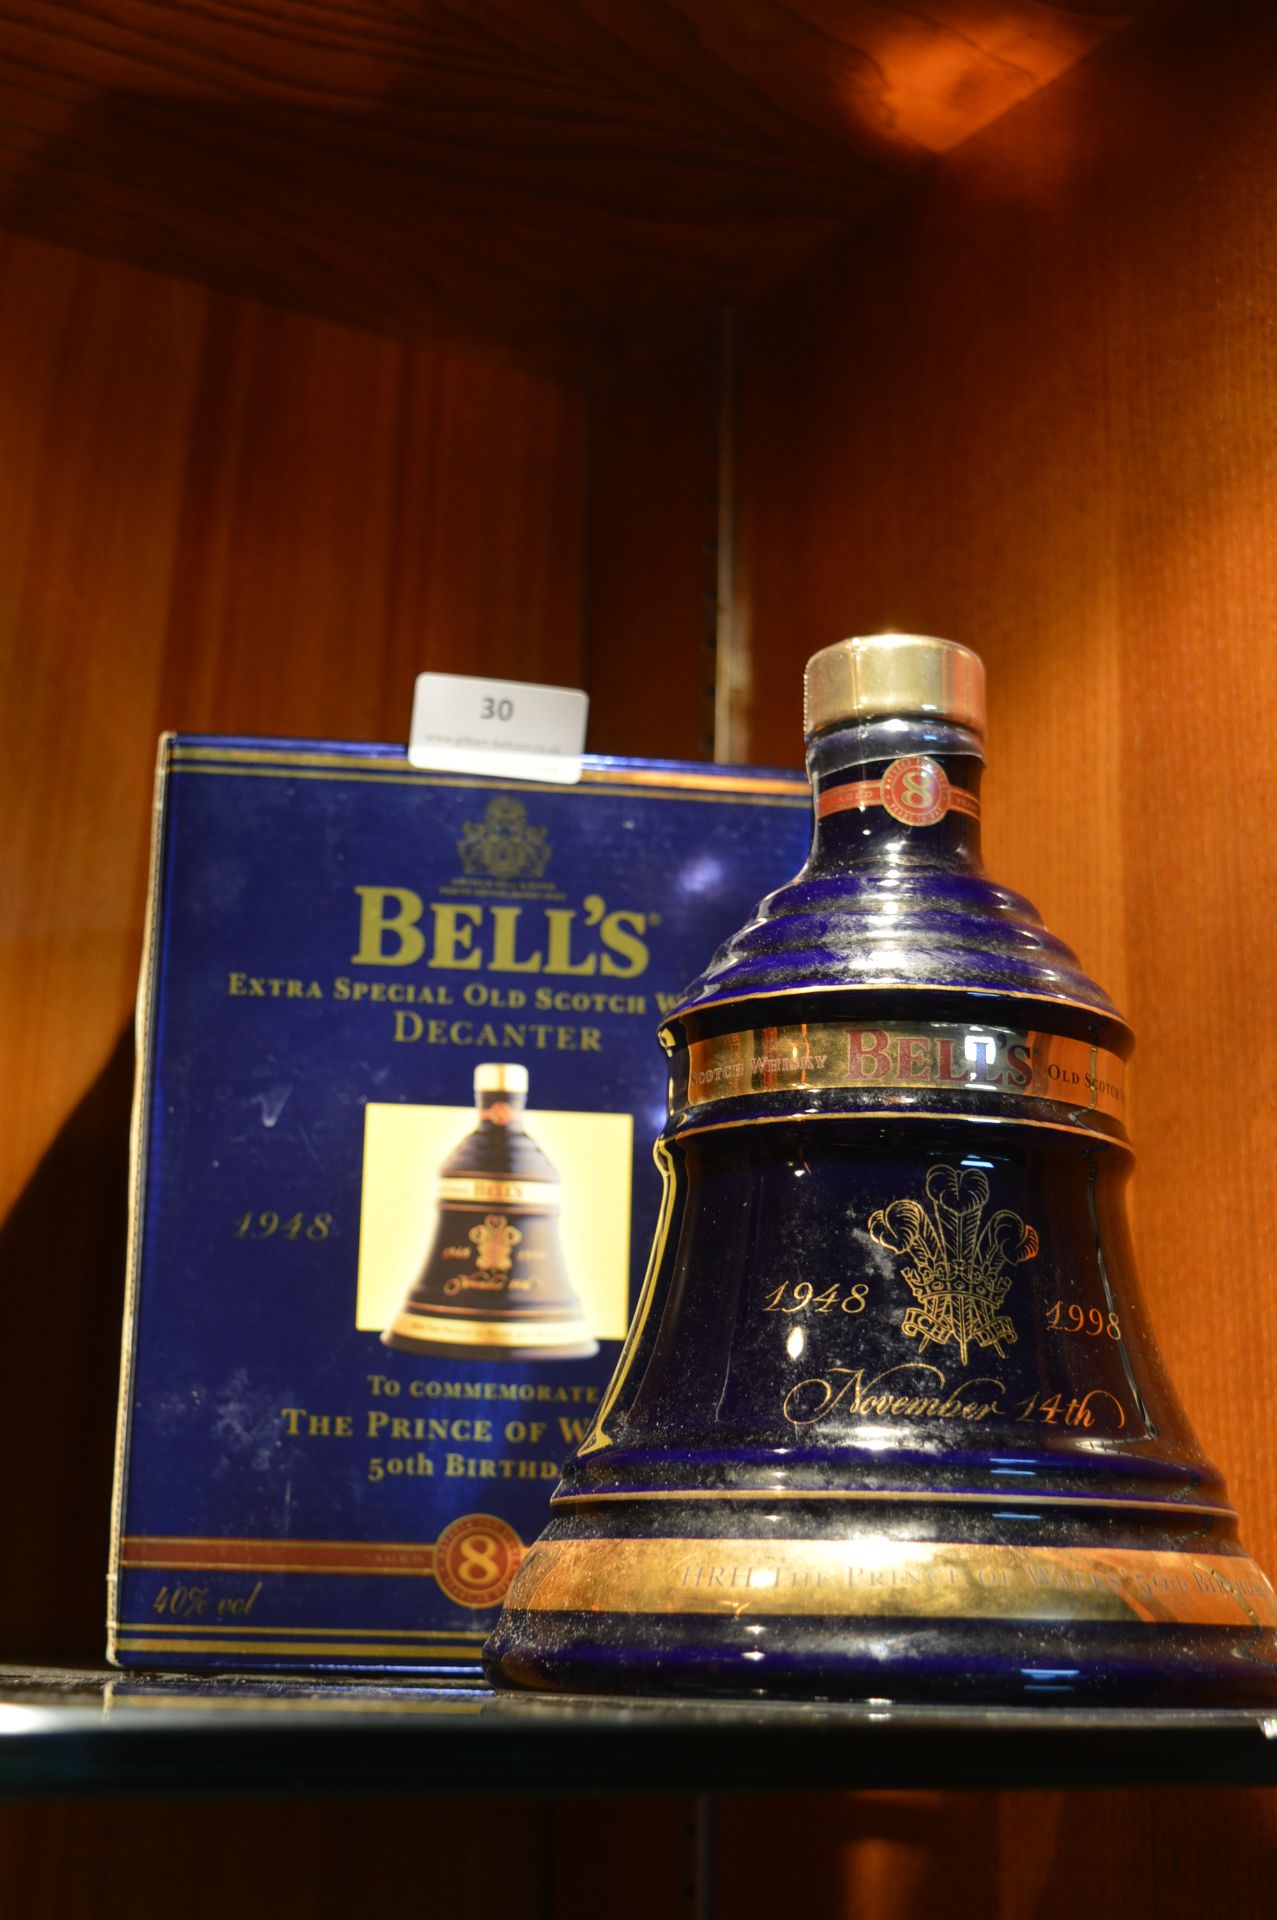 Bell Scotch Whisky Decanter and Contents - Commemo